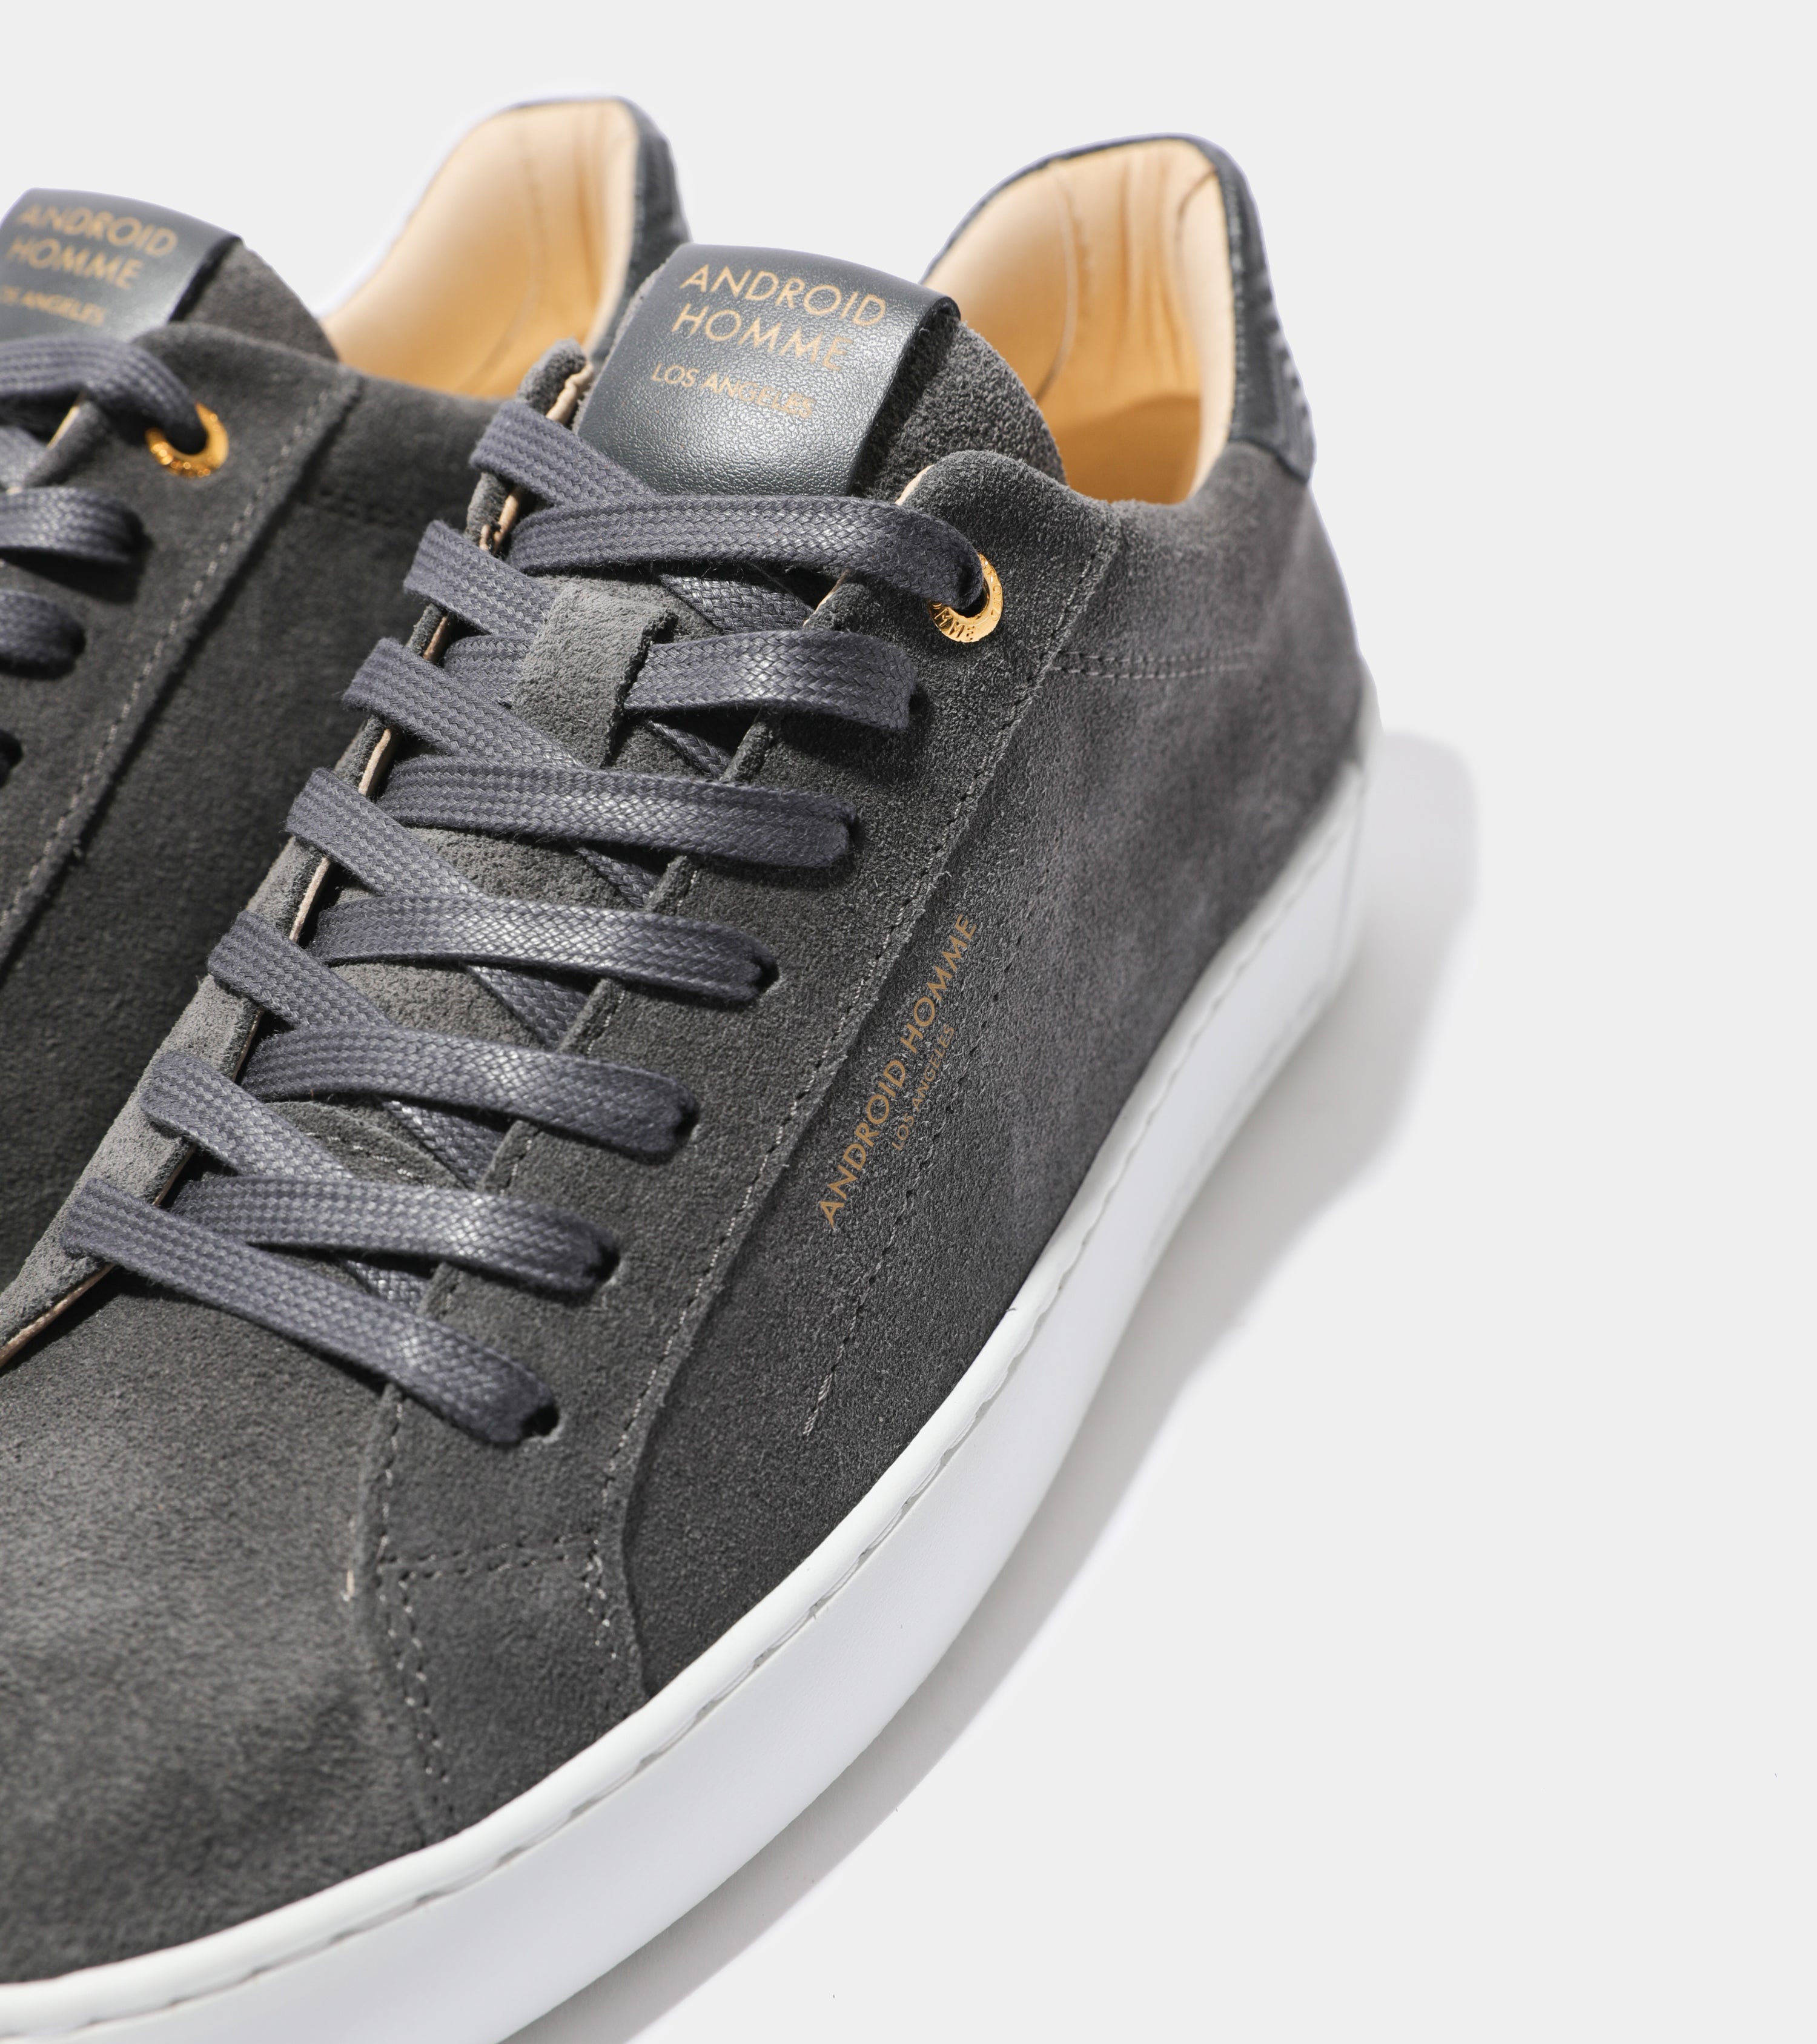 Detailed ecom imagery of the Zuma Grey Suede Zig Zag Leather Android Homme Trainers.